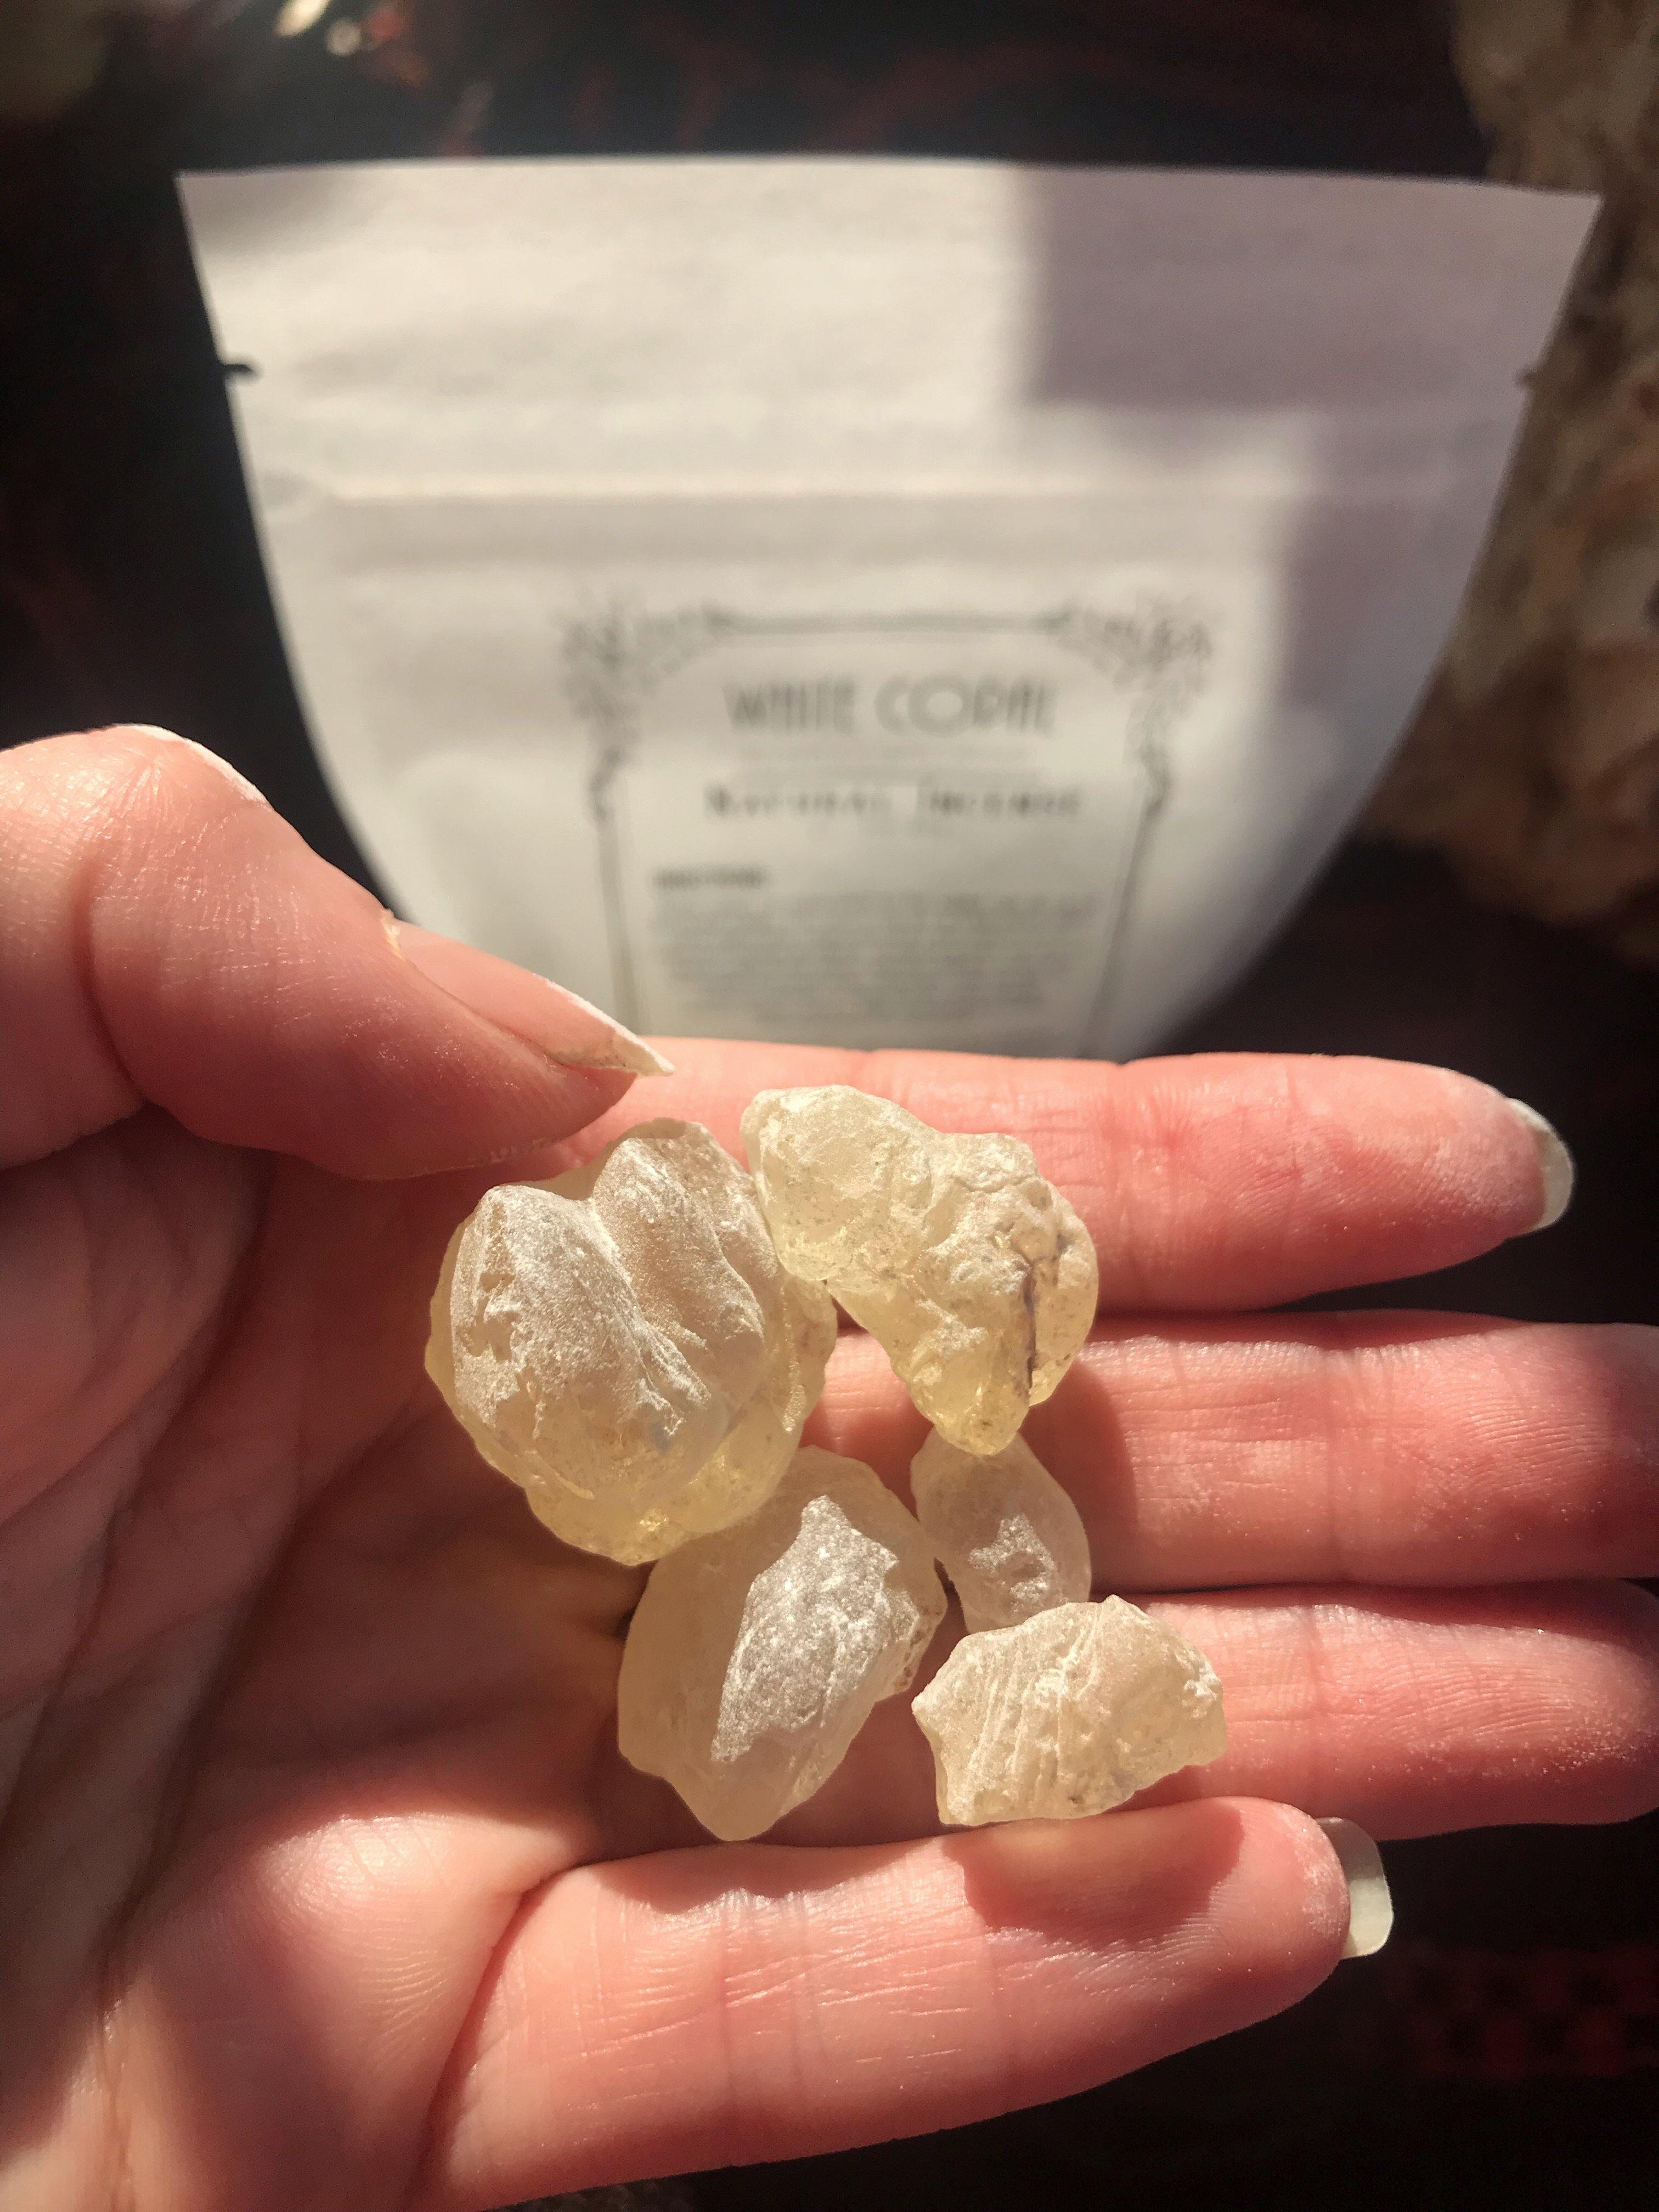 White Copal (Mexico) Resin - For Incense, Spells, and Potions - Keven Craft Rituals